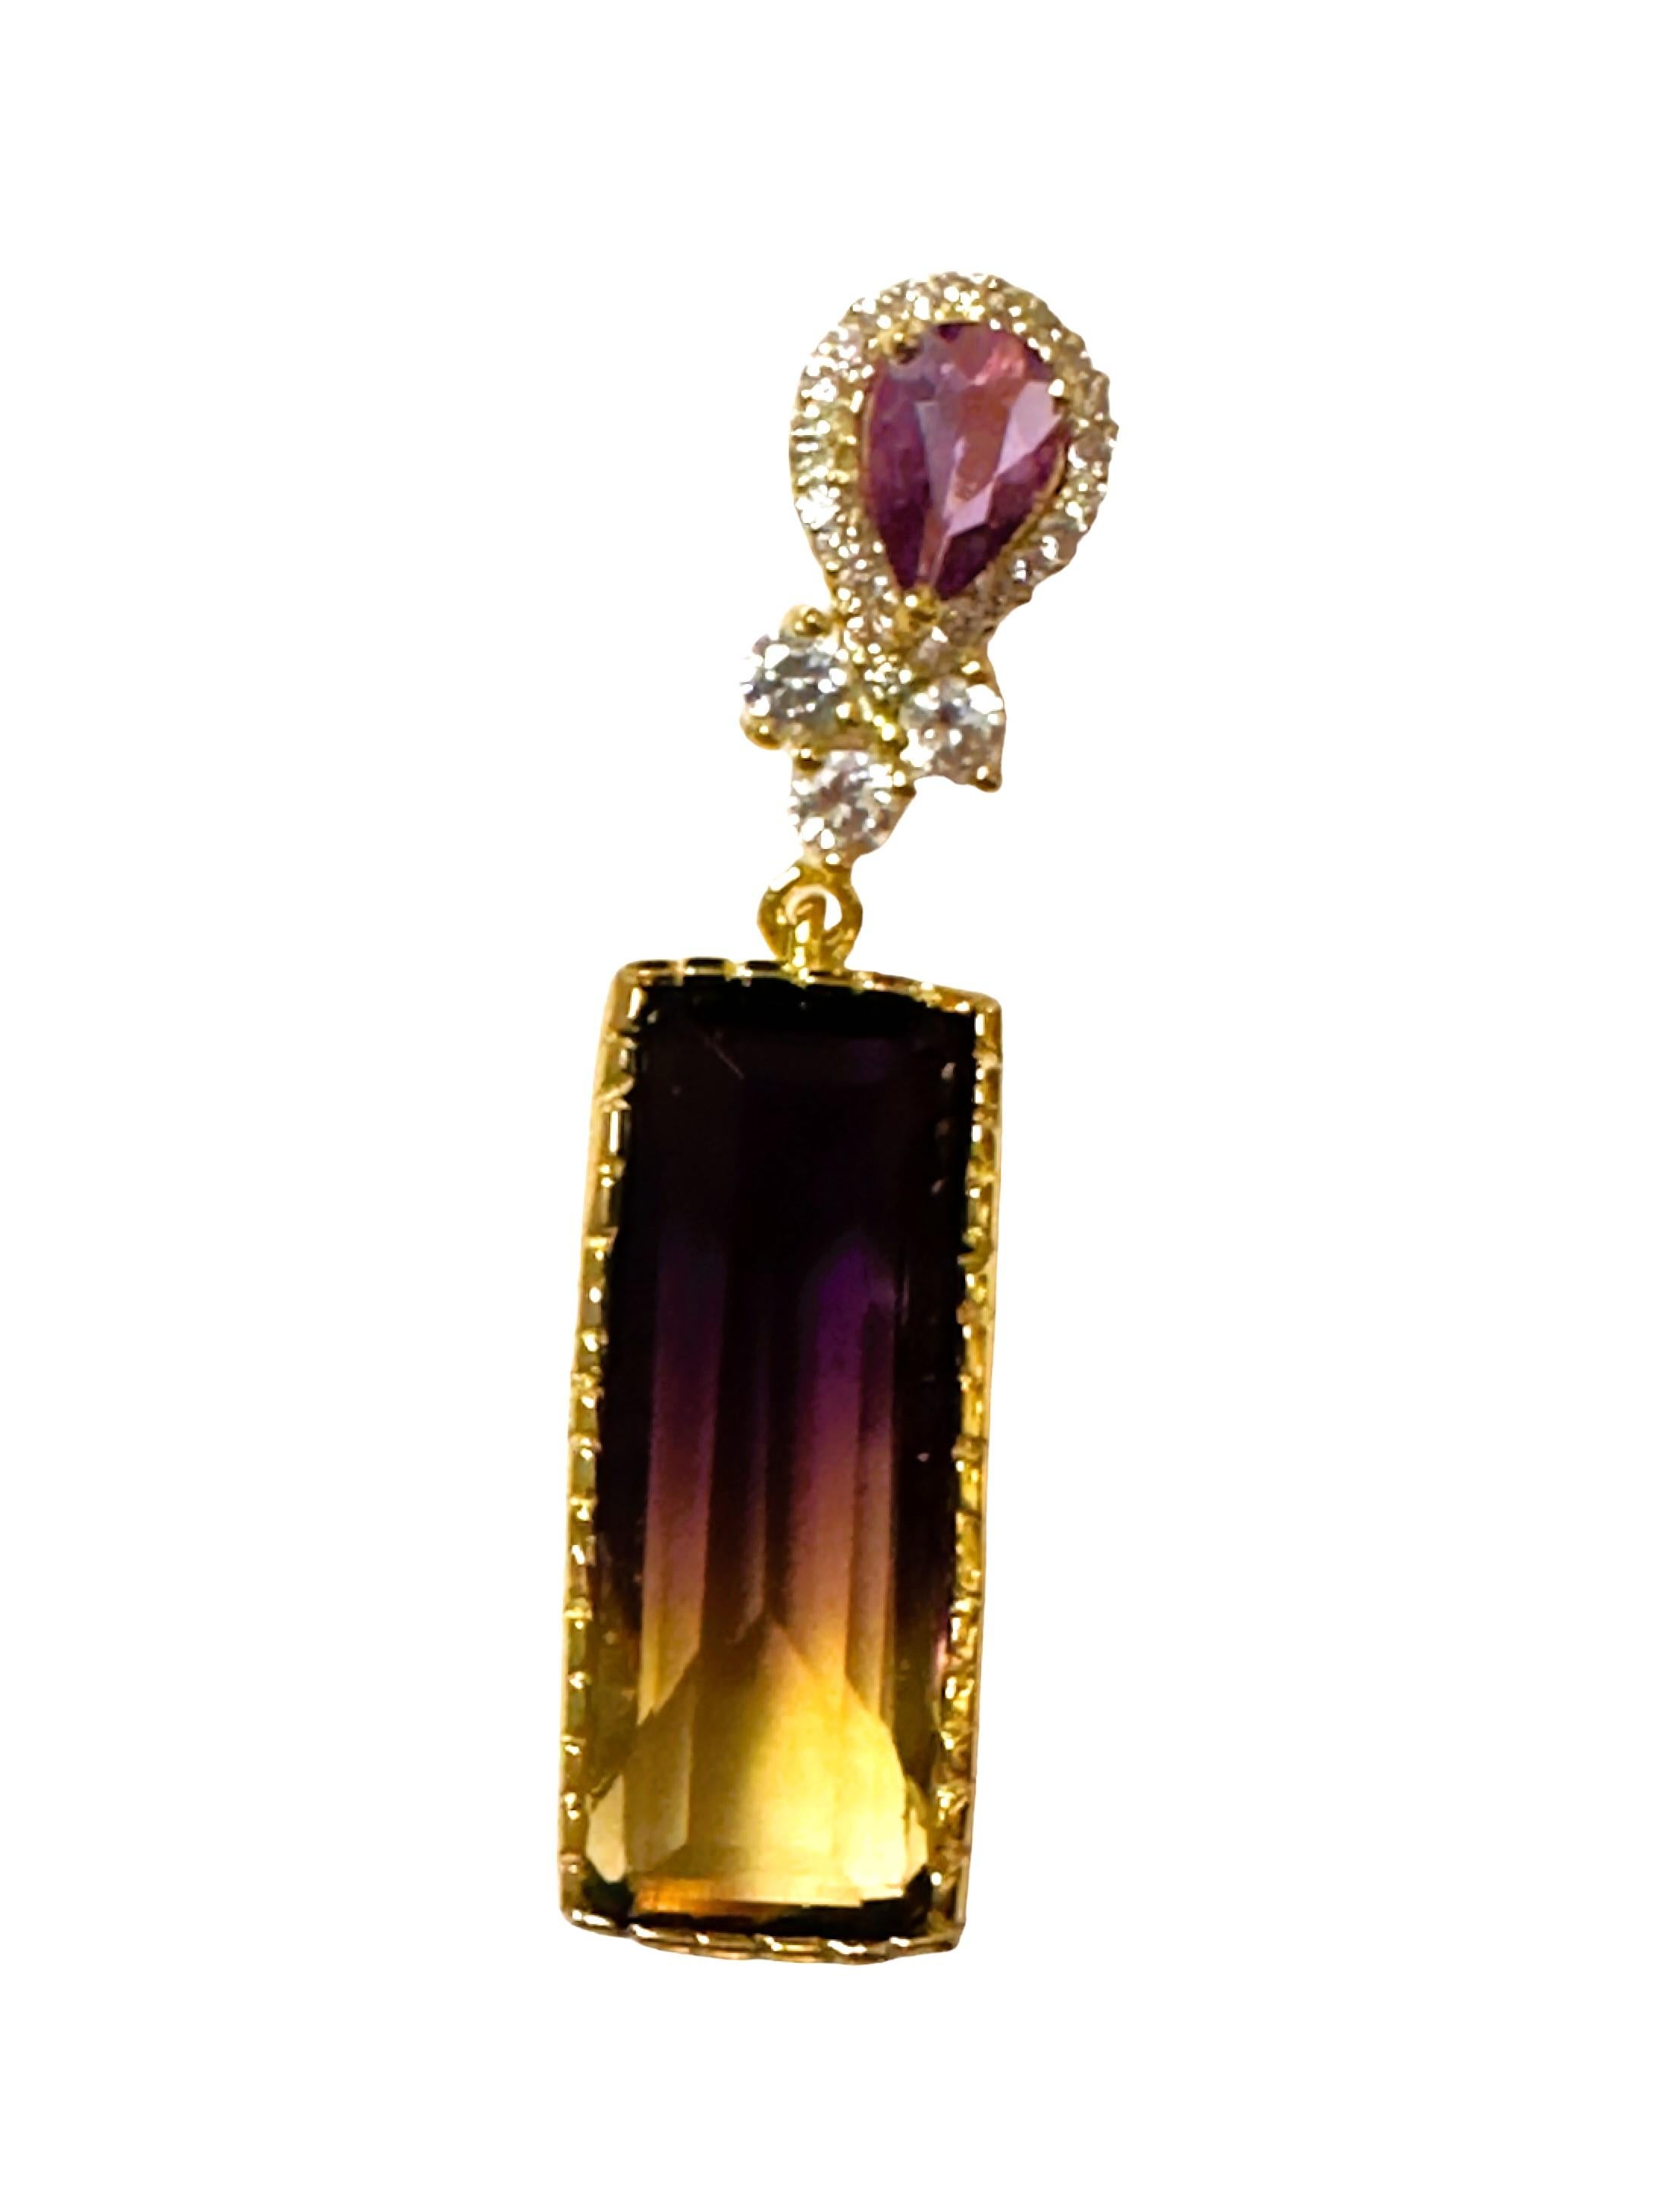 New Brazilian IF 13 Ct Ametrine Spinel Yellow Gold Plated Sterling Pendant For Sale 1